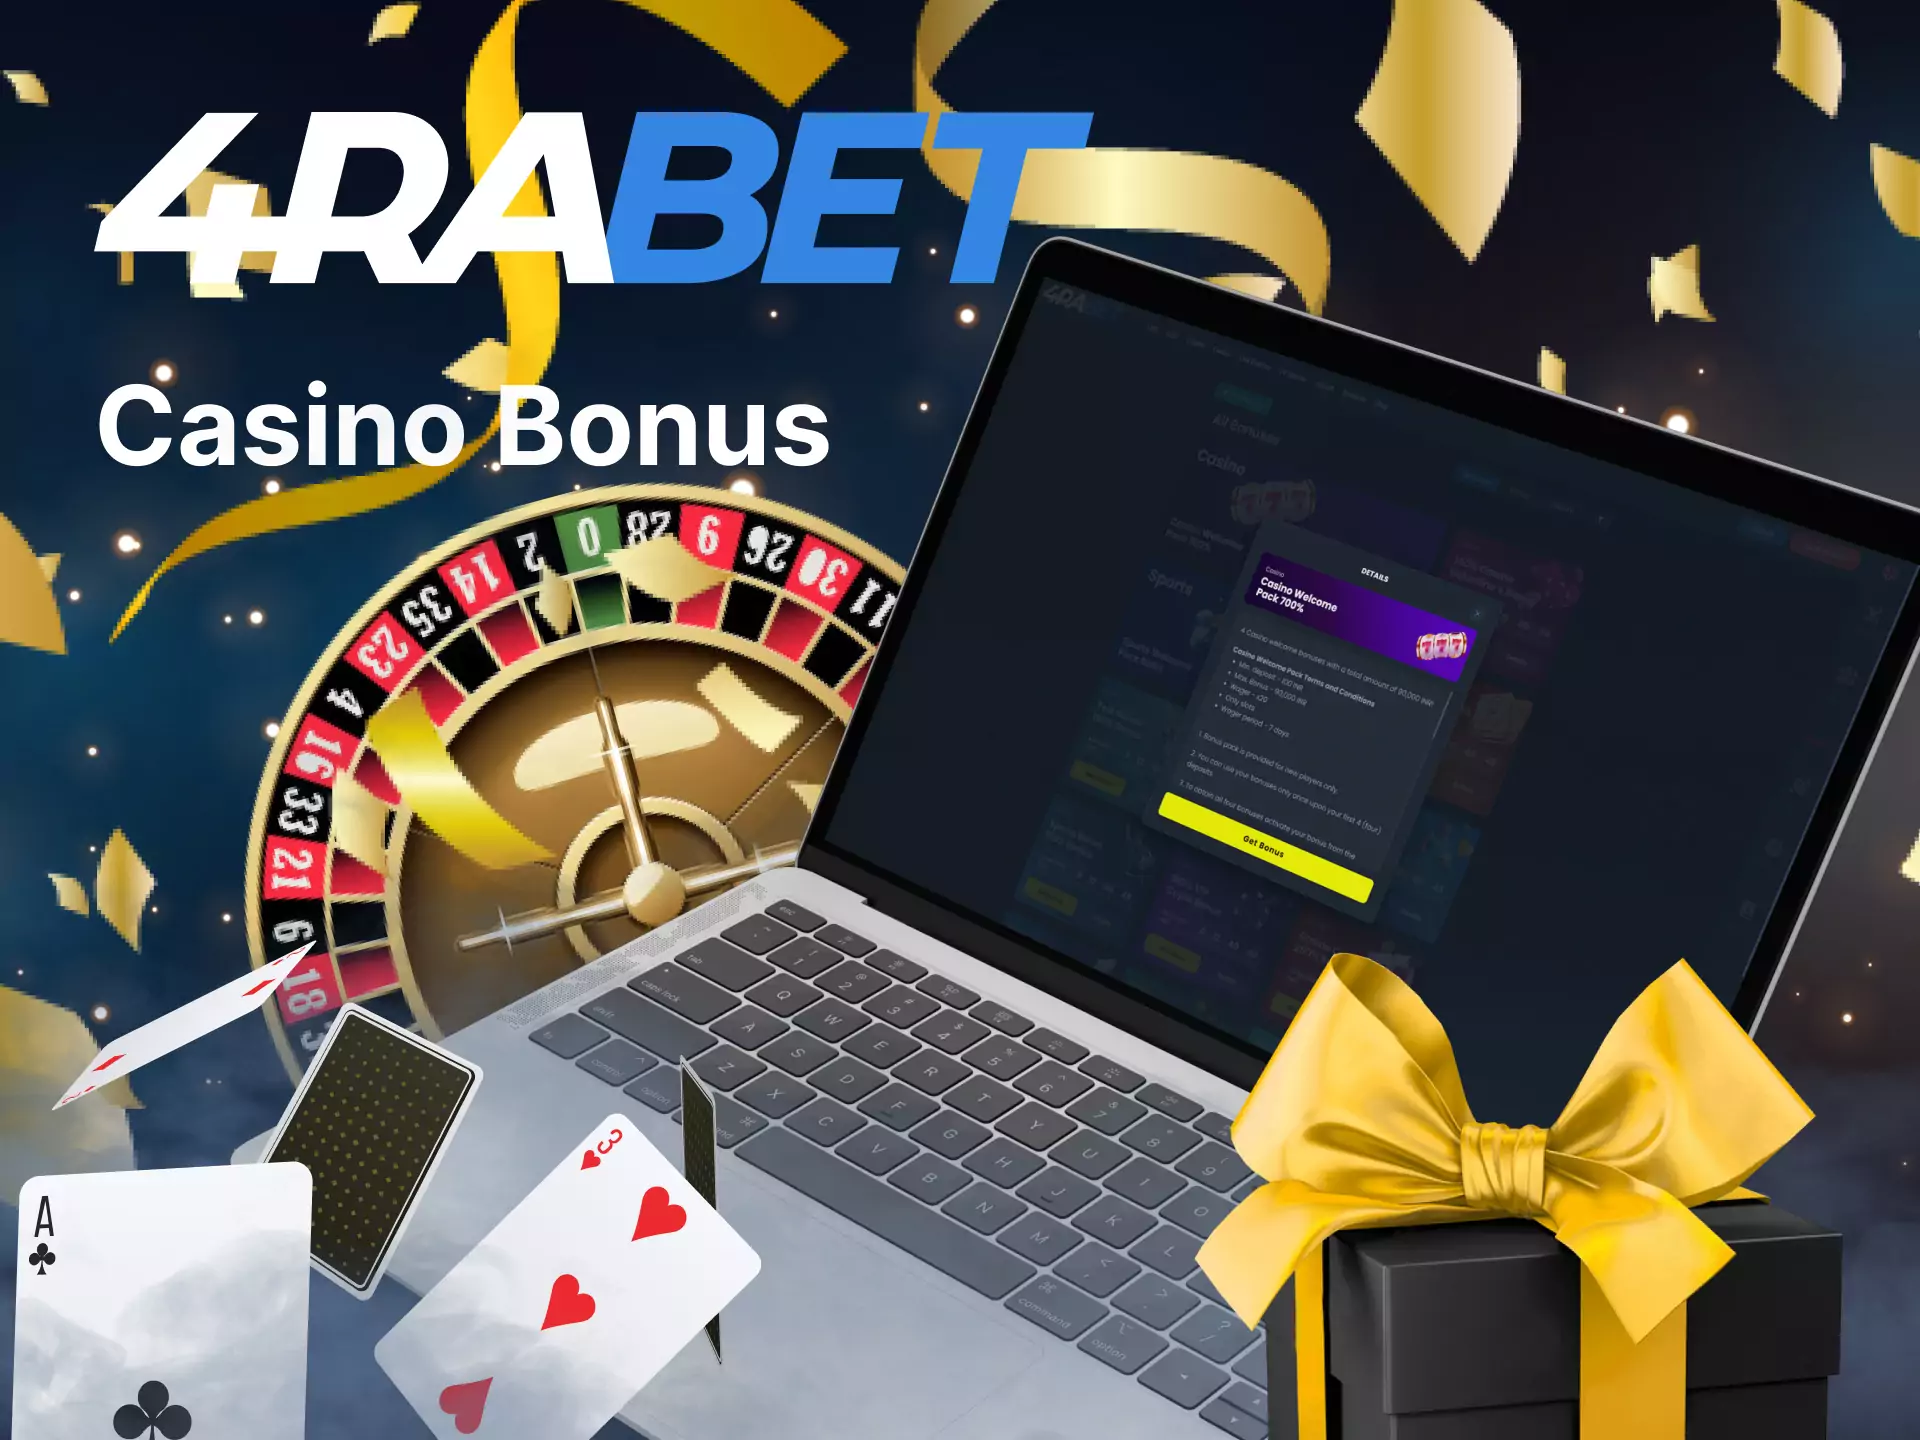 Get a special bonus on casino games from 4rabet.